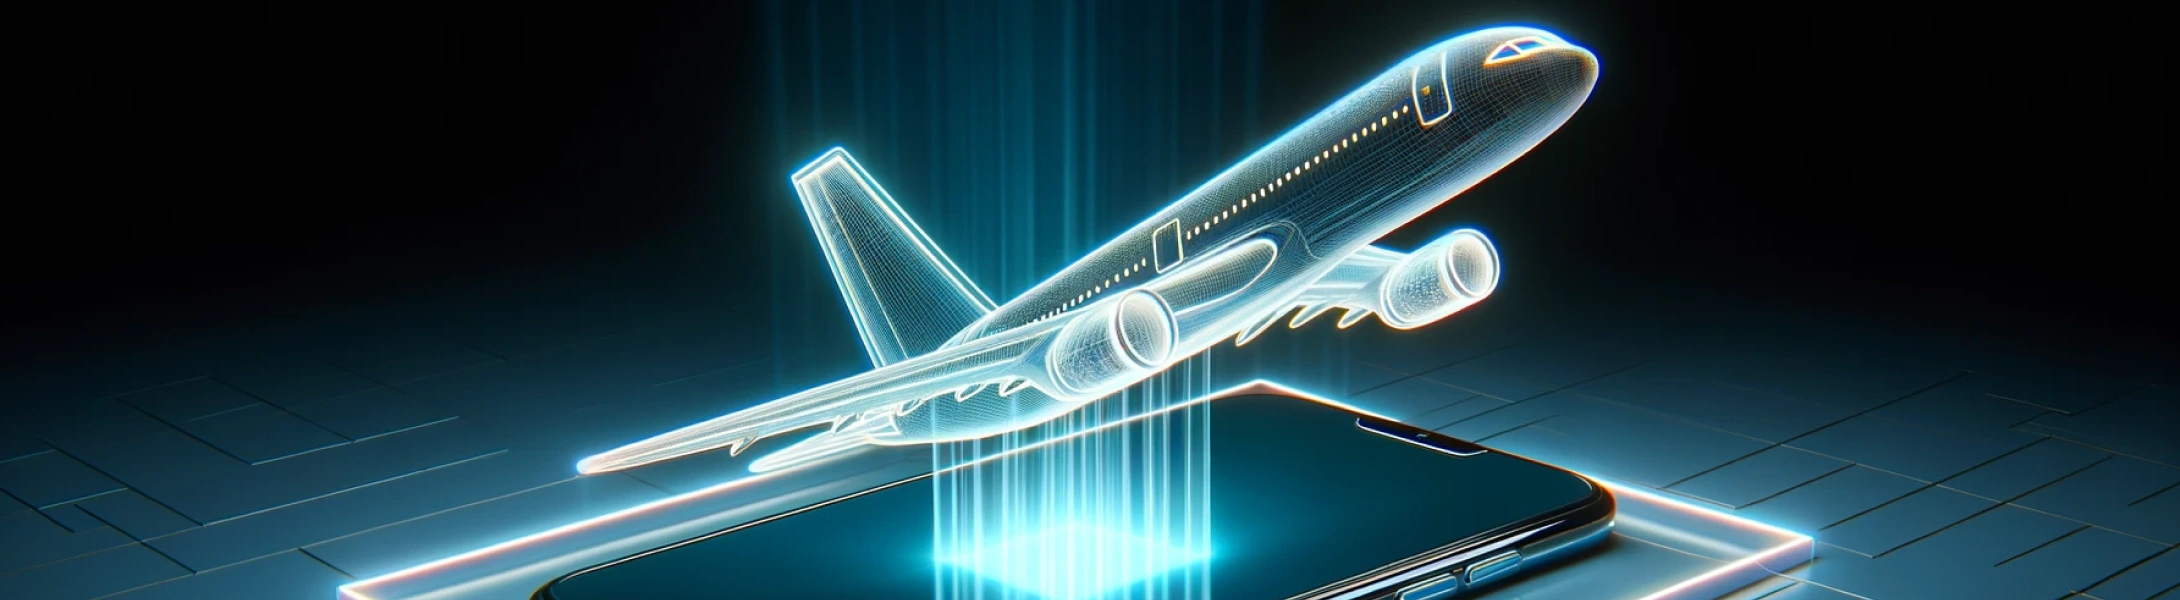 Developing the Custom Aviation Software of the Future: Innovation, Personalization, Compliance